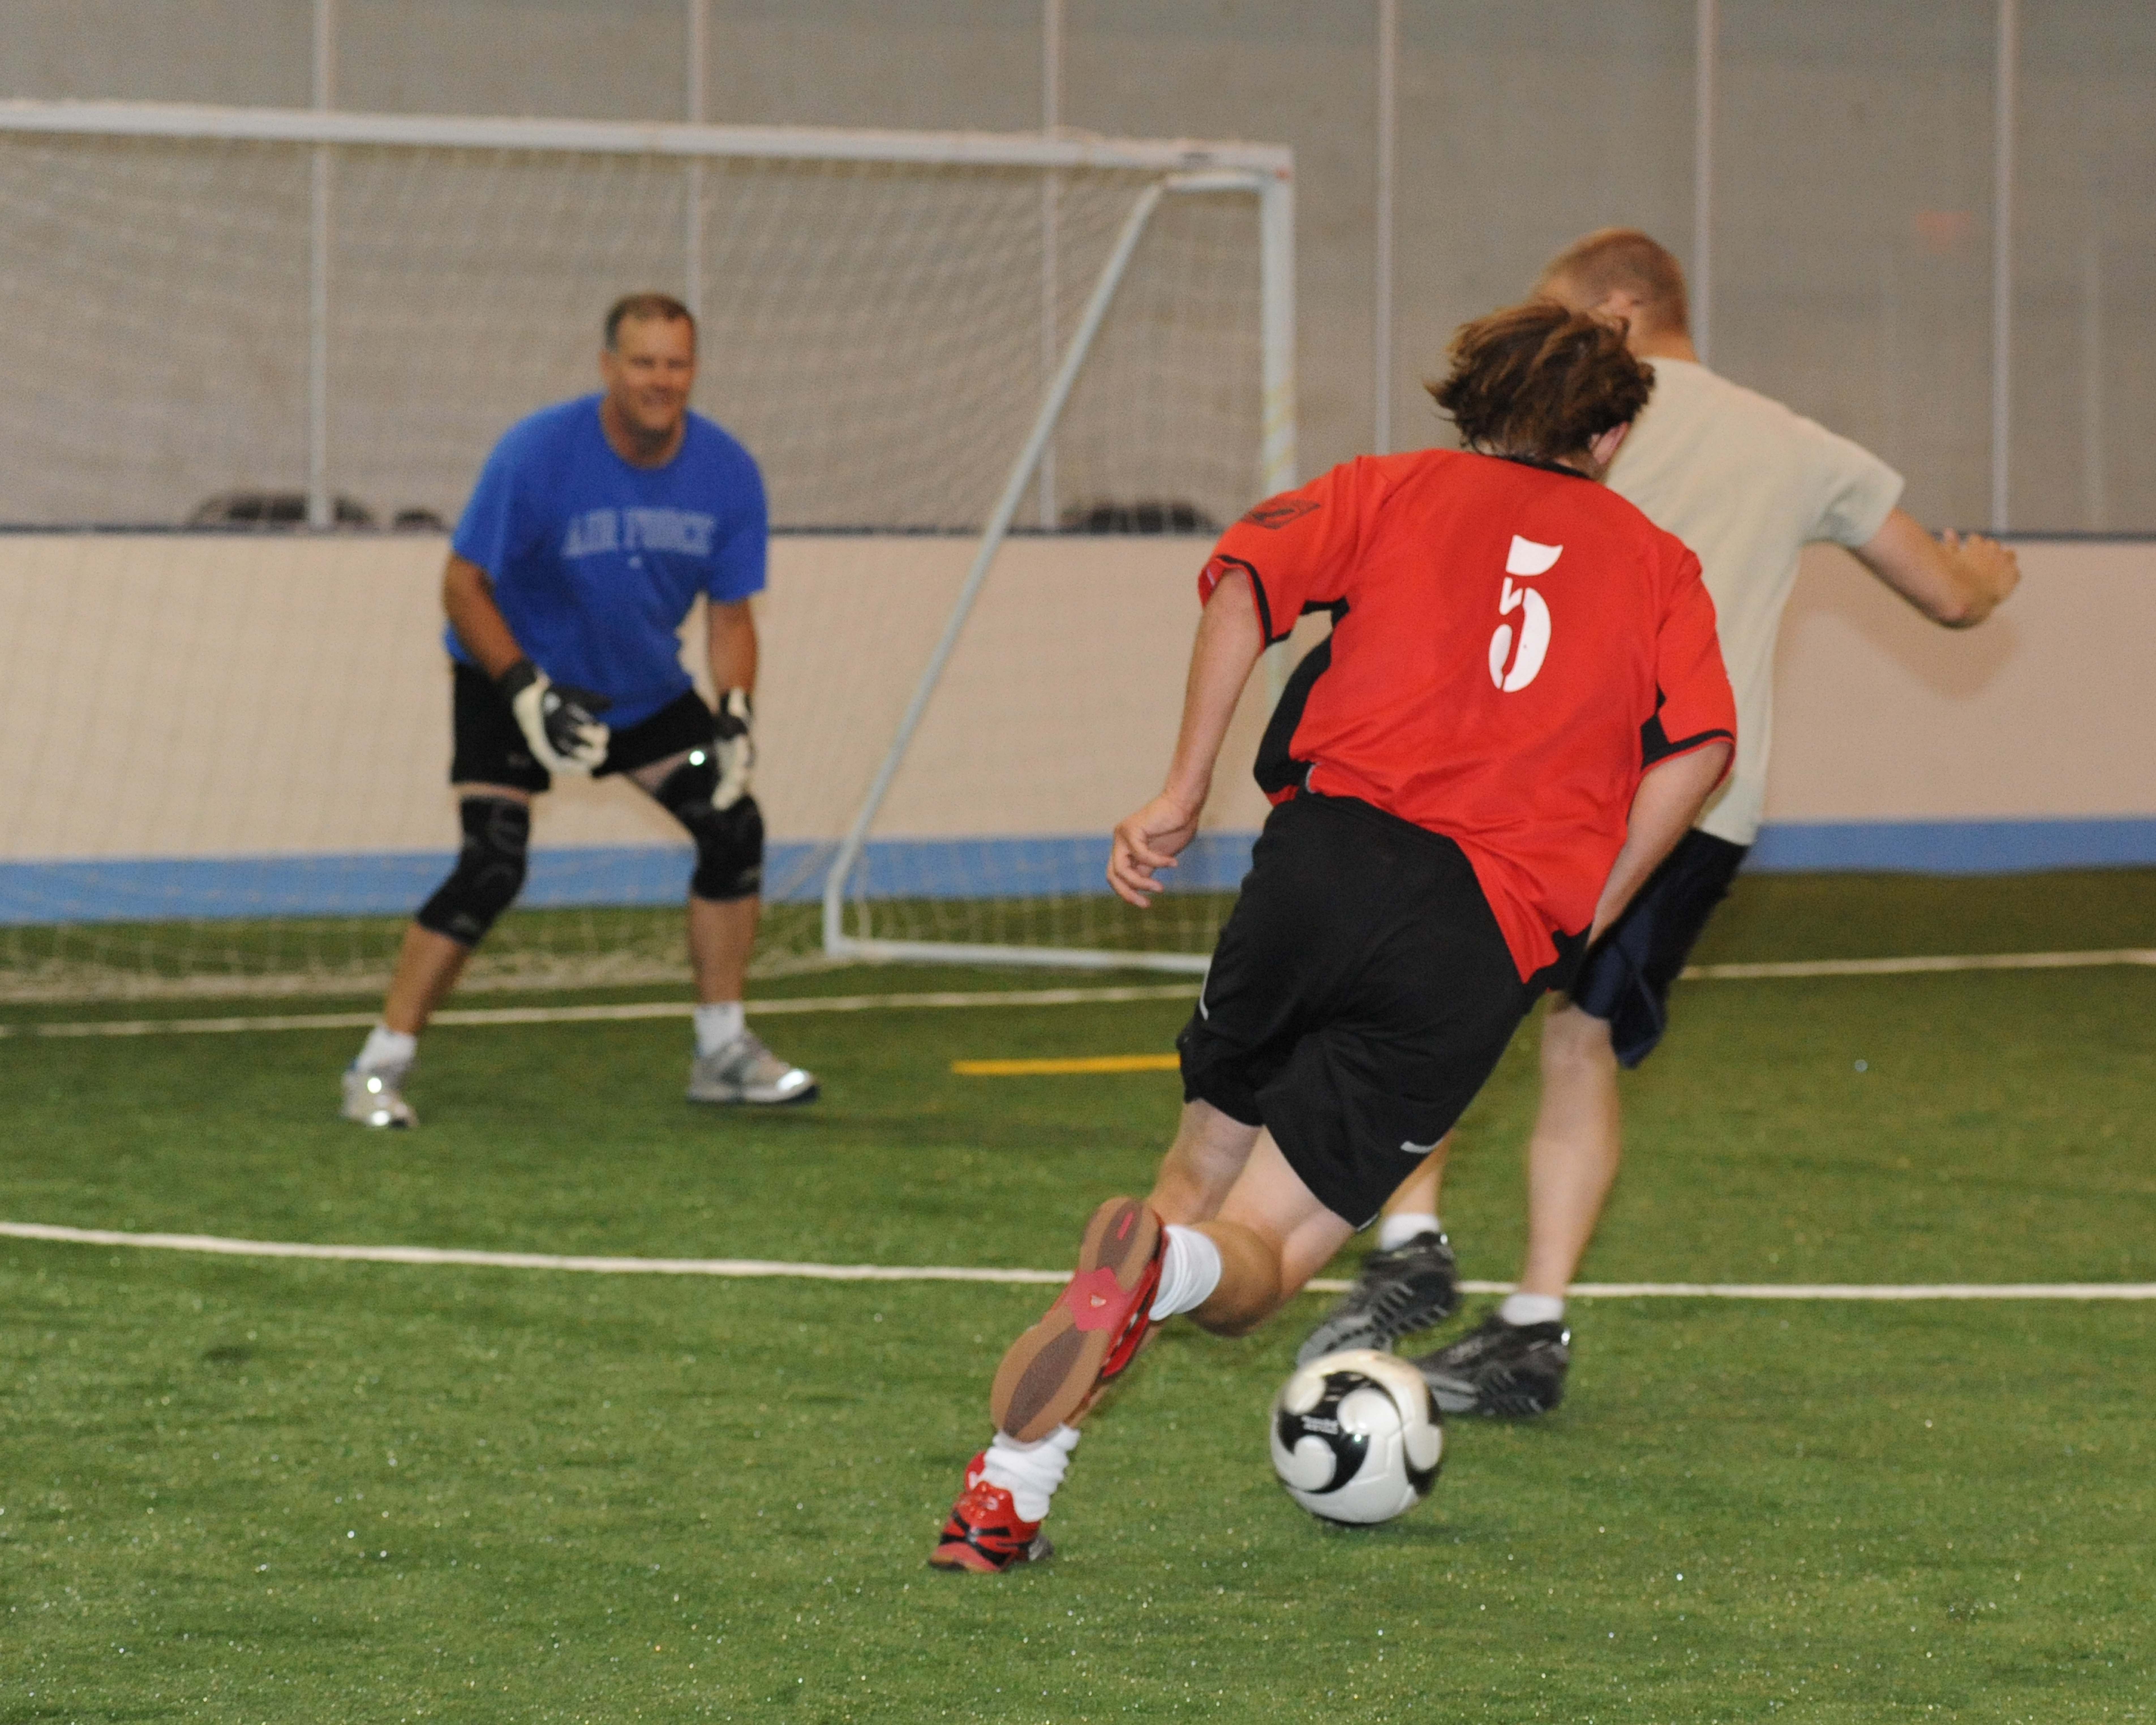 Soccer tournament breaks in new field turf > Grand Forks Air Force Base